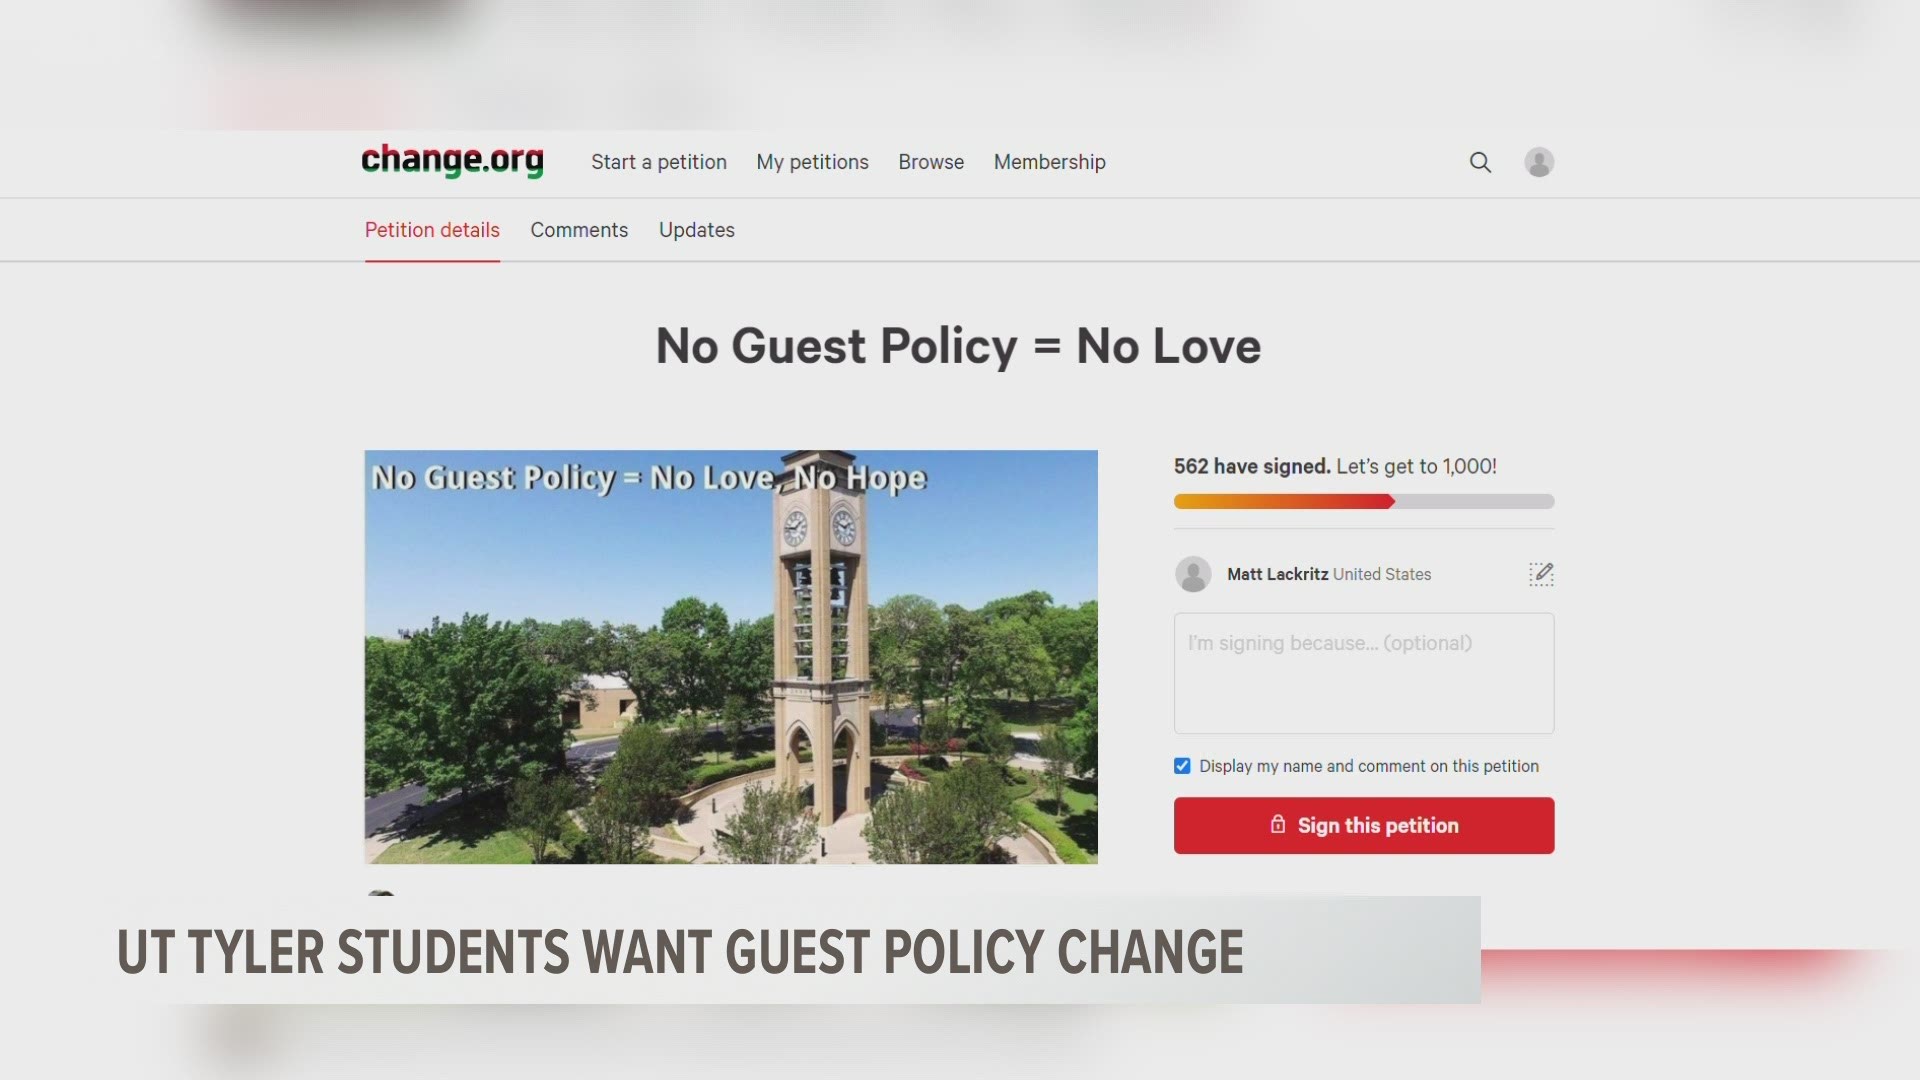 Hundreds of people have signed onto the "No Guest Policy = No Love" petition calling for UT Tyler to change their guest policy at campus apartments and its residence